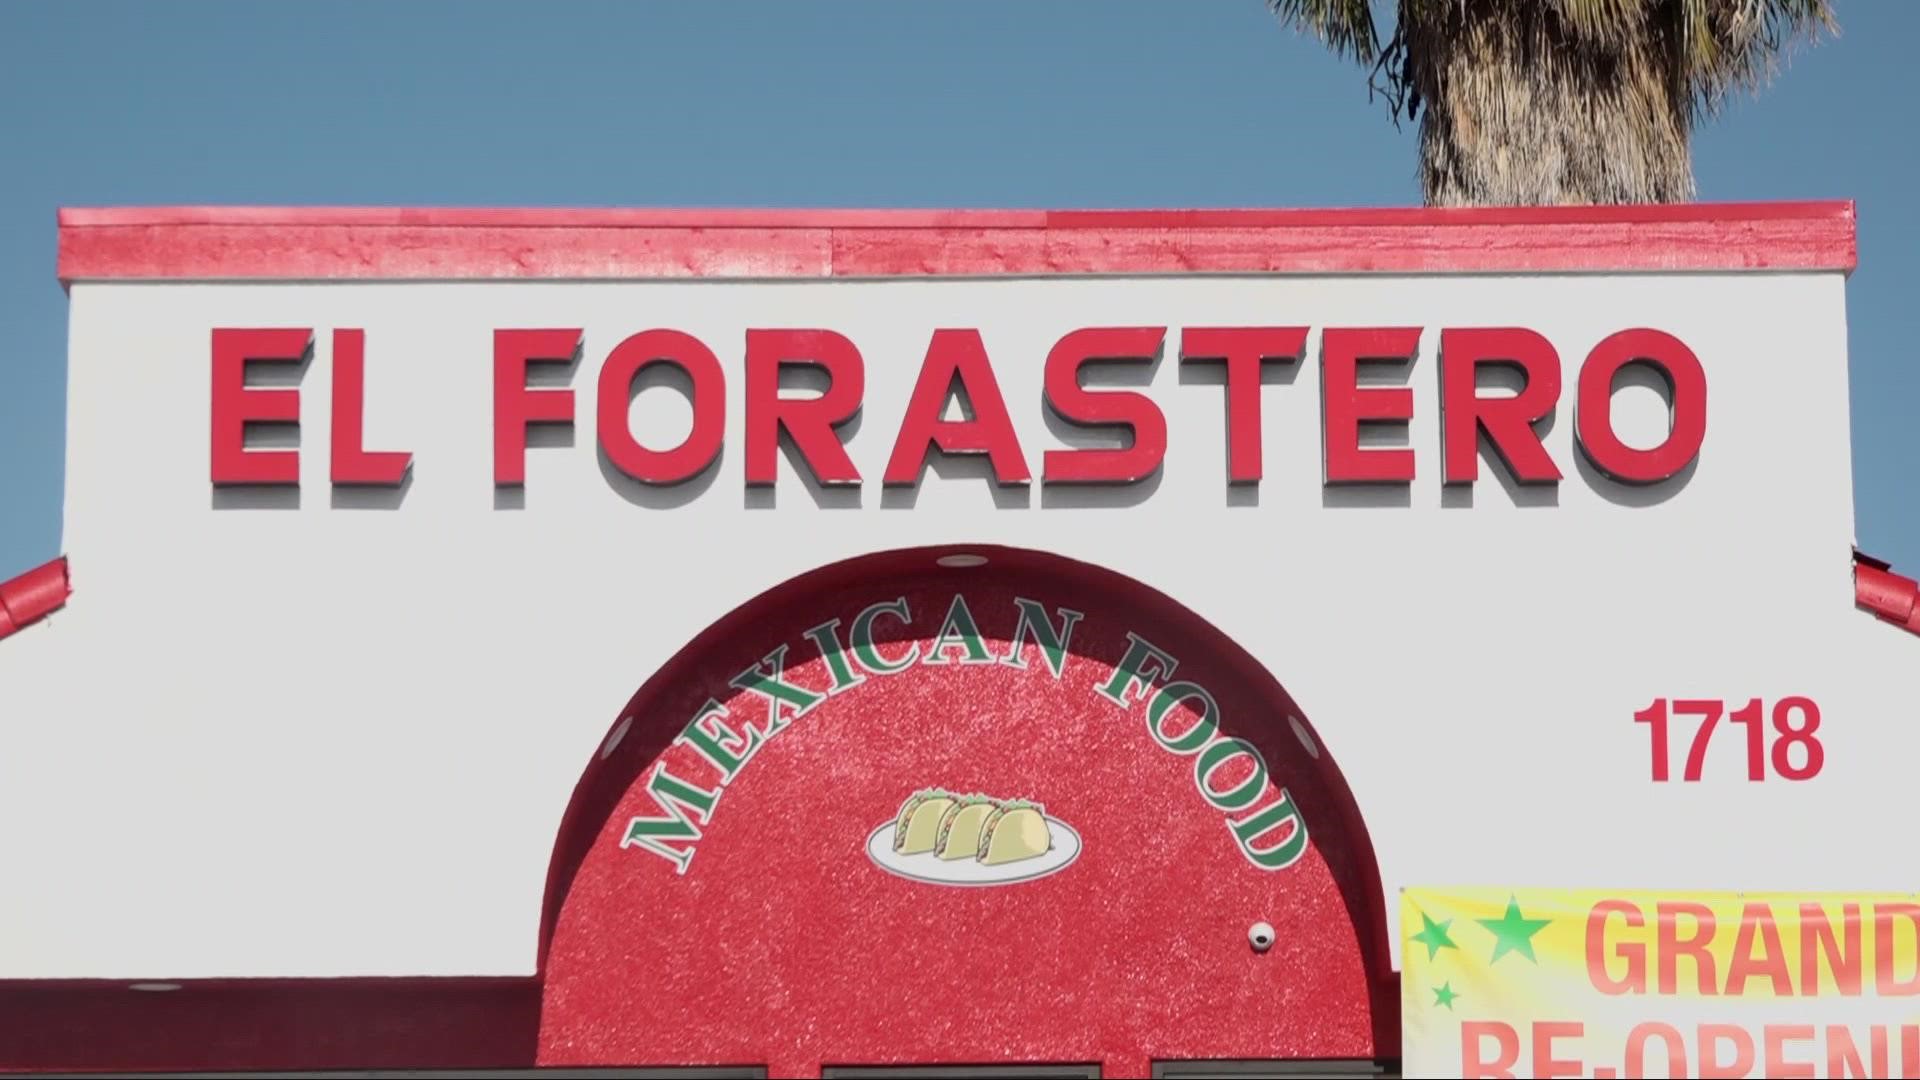 El Forastero Mexican Food reopened Friday one year after being set ablaze and almost completely burning down.